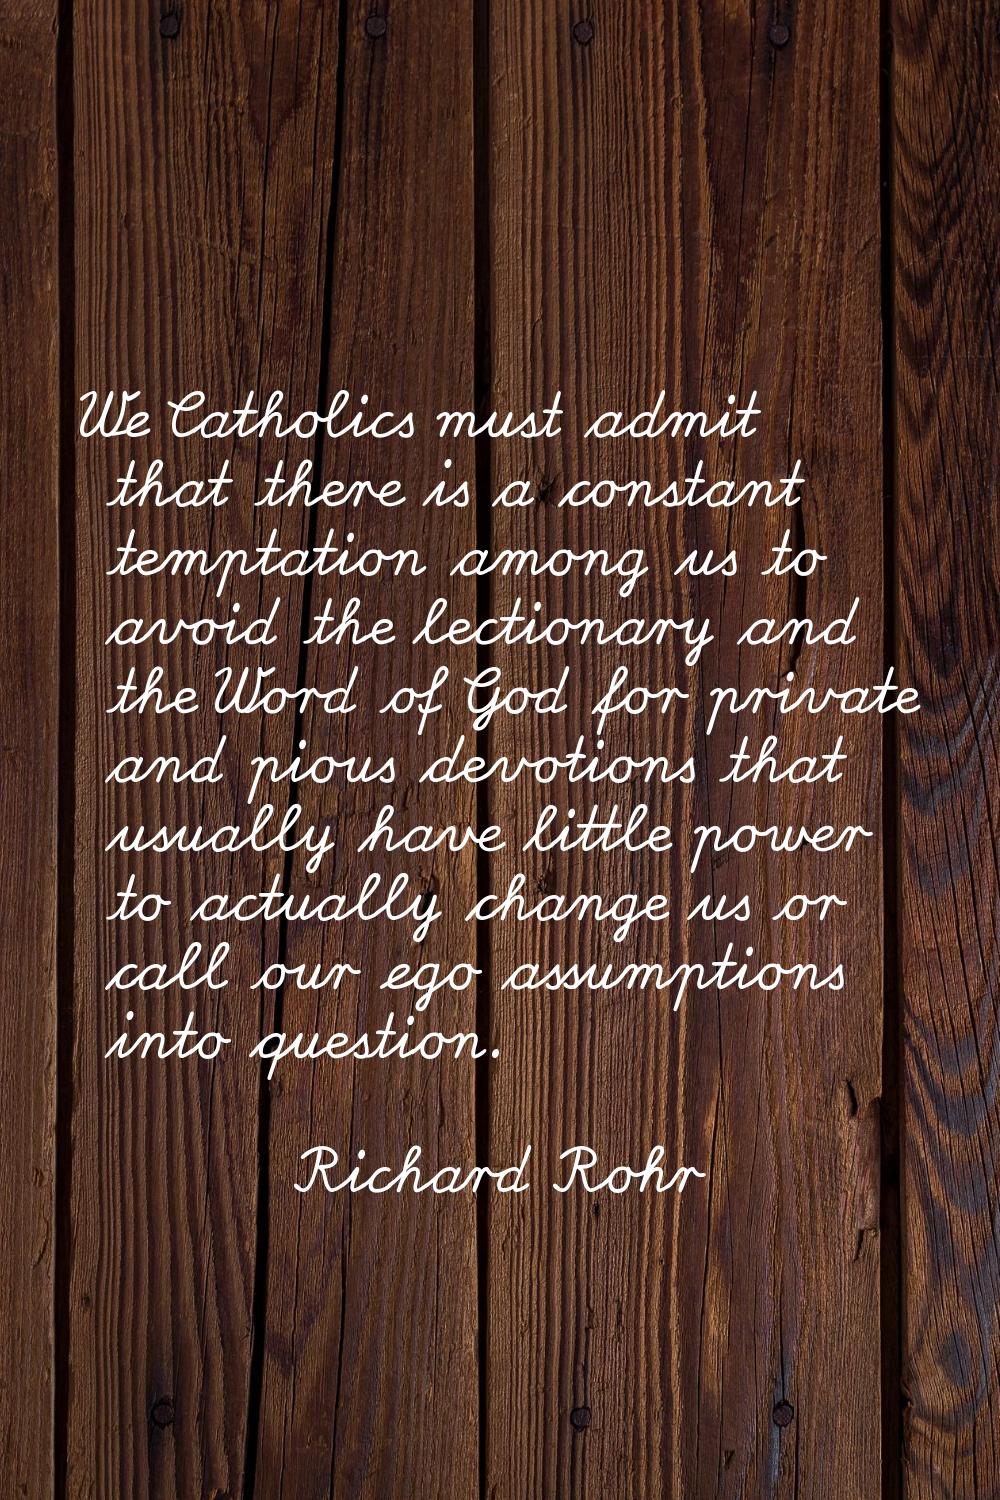 We Catholics must admit that there is a constant temptation among us to avoid the lectionary and th